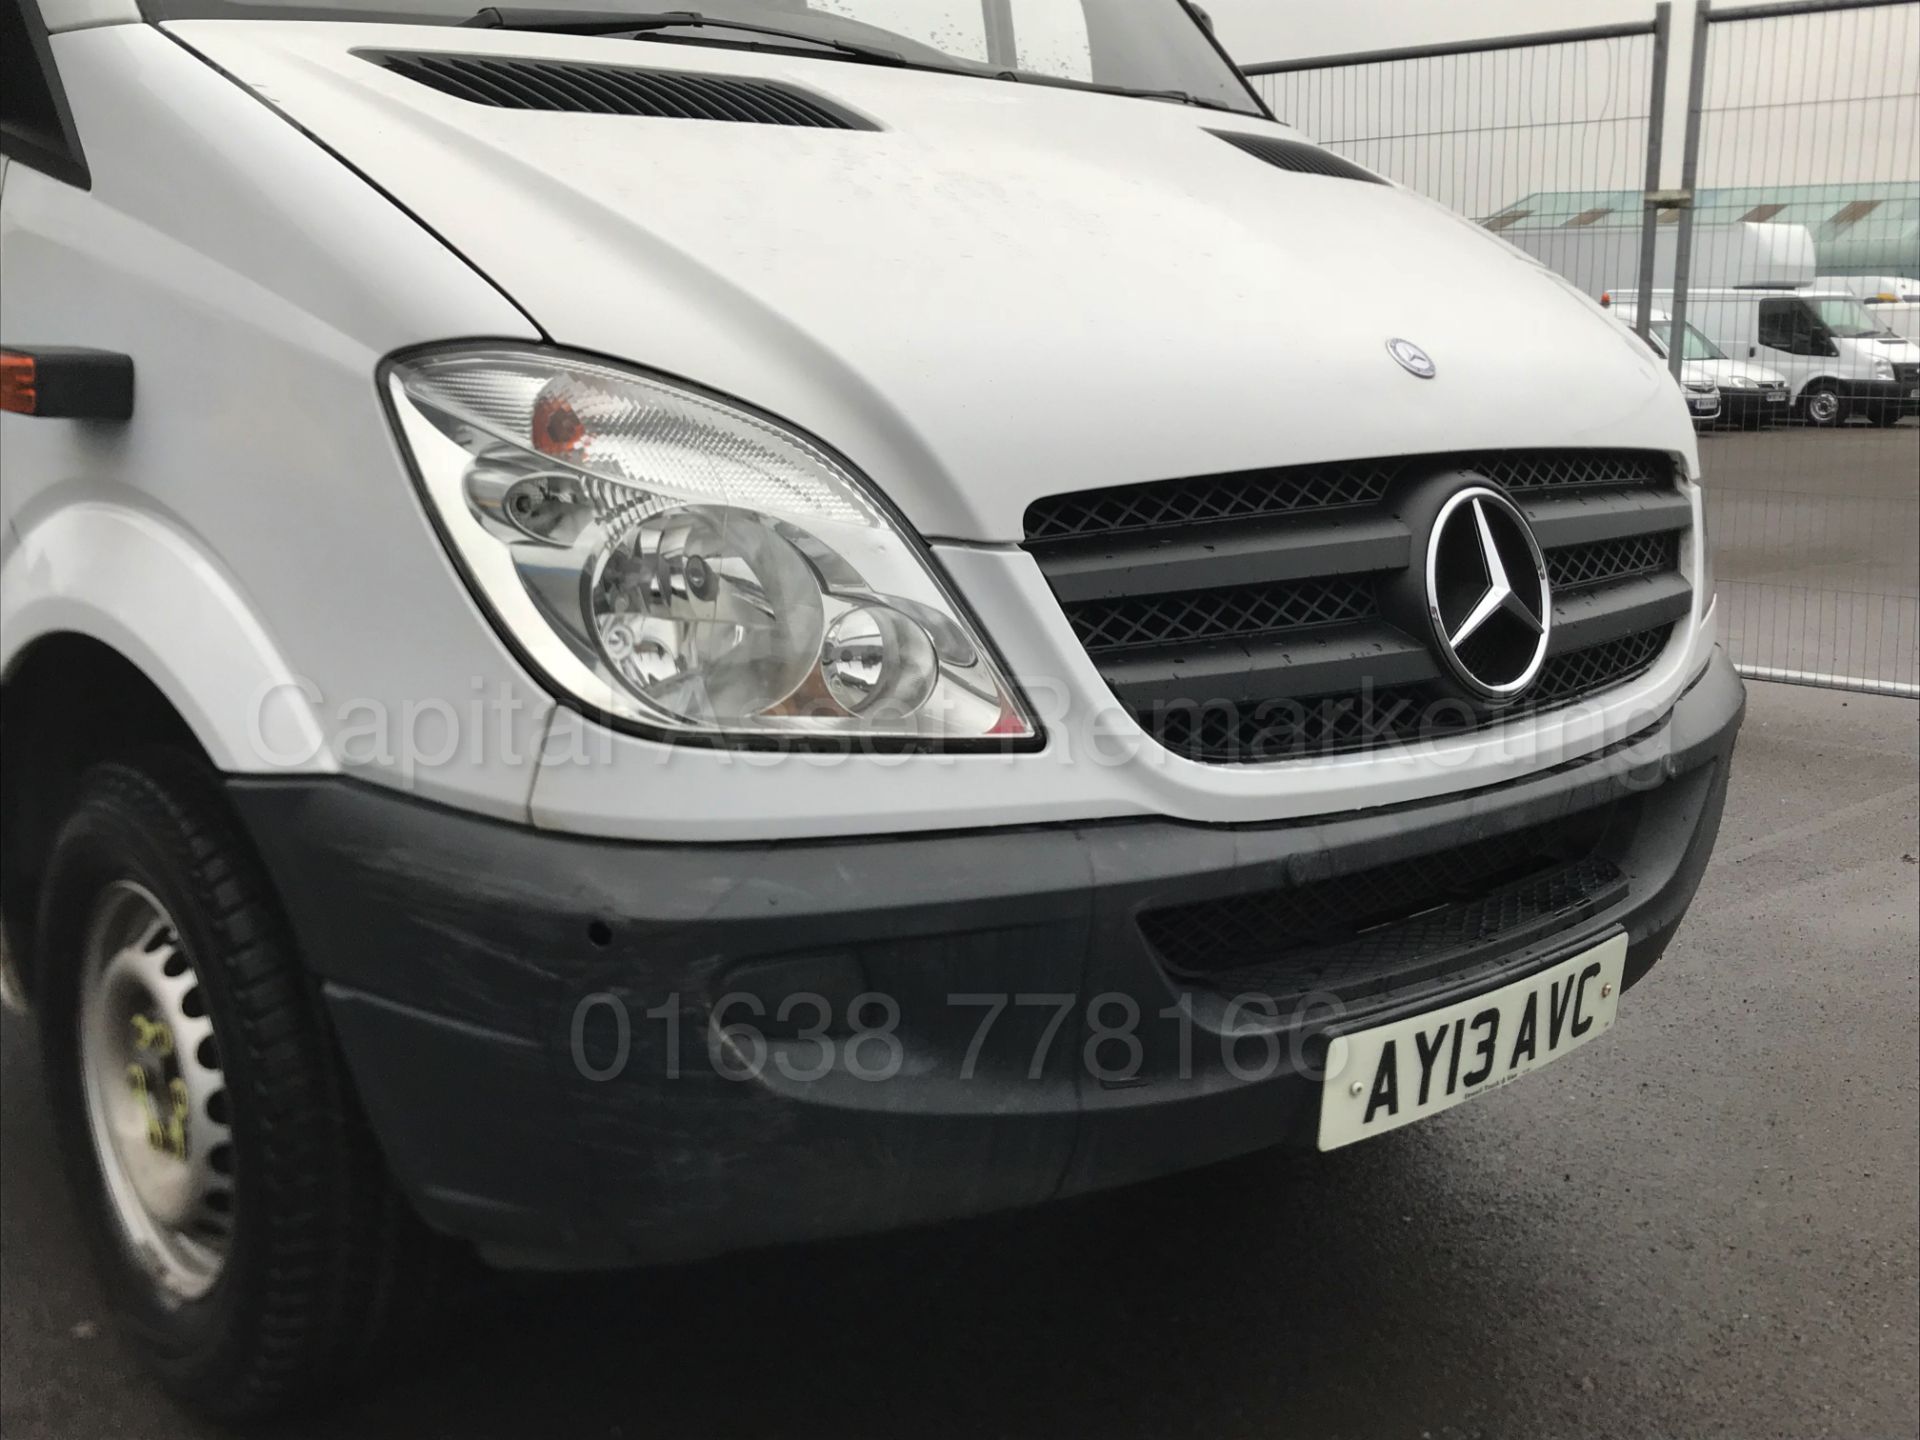 MERCEDES-BENZ SPRINTER 313 CDI 'CHASSIS CAB' (2013 - 13 REG) 130 BHP - 6 SPEED' *CRUISE CONTROL* - Image 11 of 19